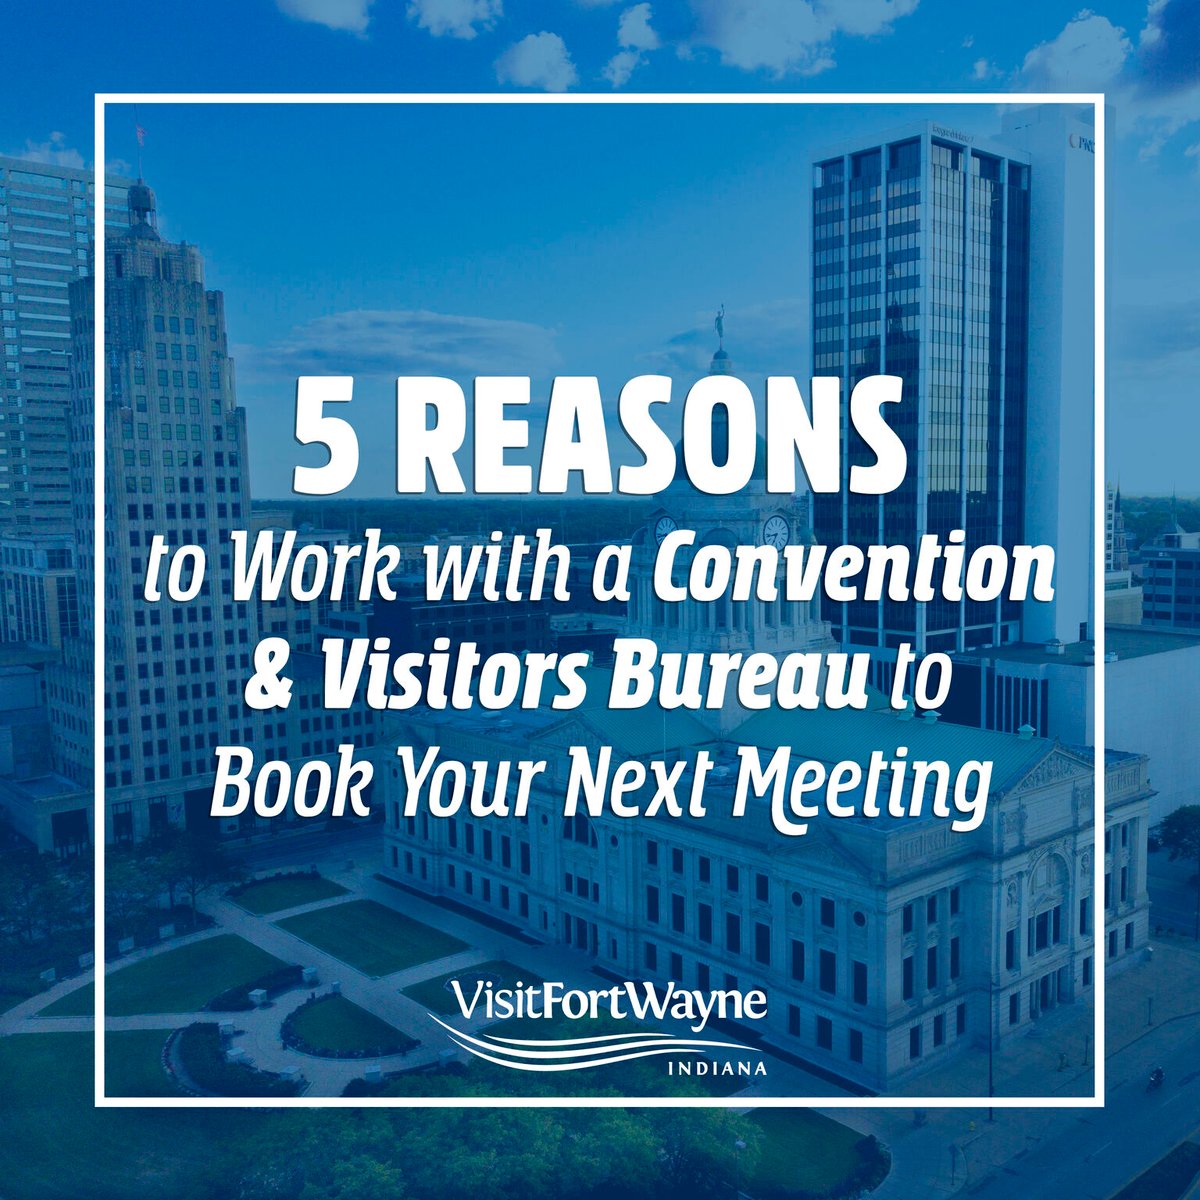 5 Reasons to Work with a Convention & Visitors Bureau to Book your Next Meeting